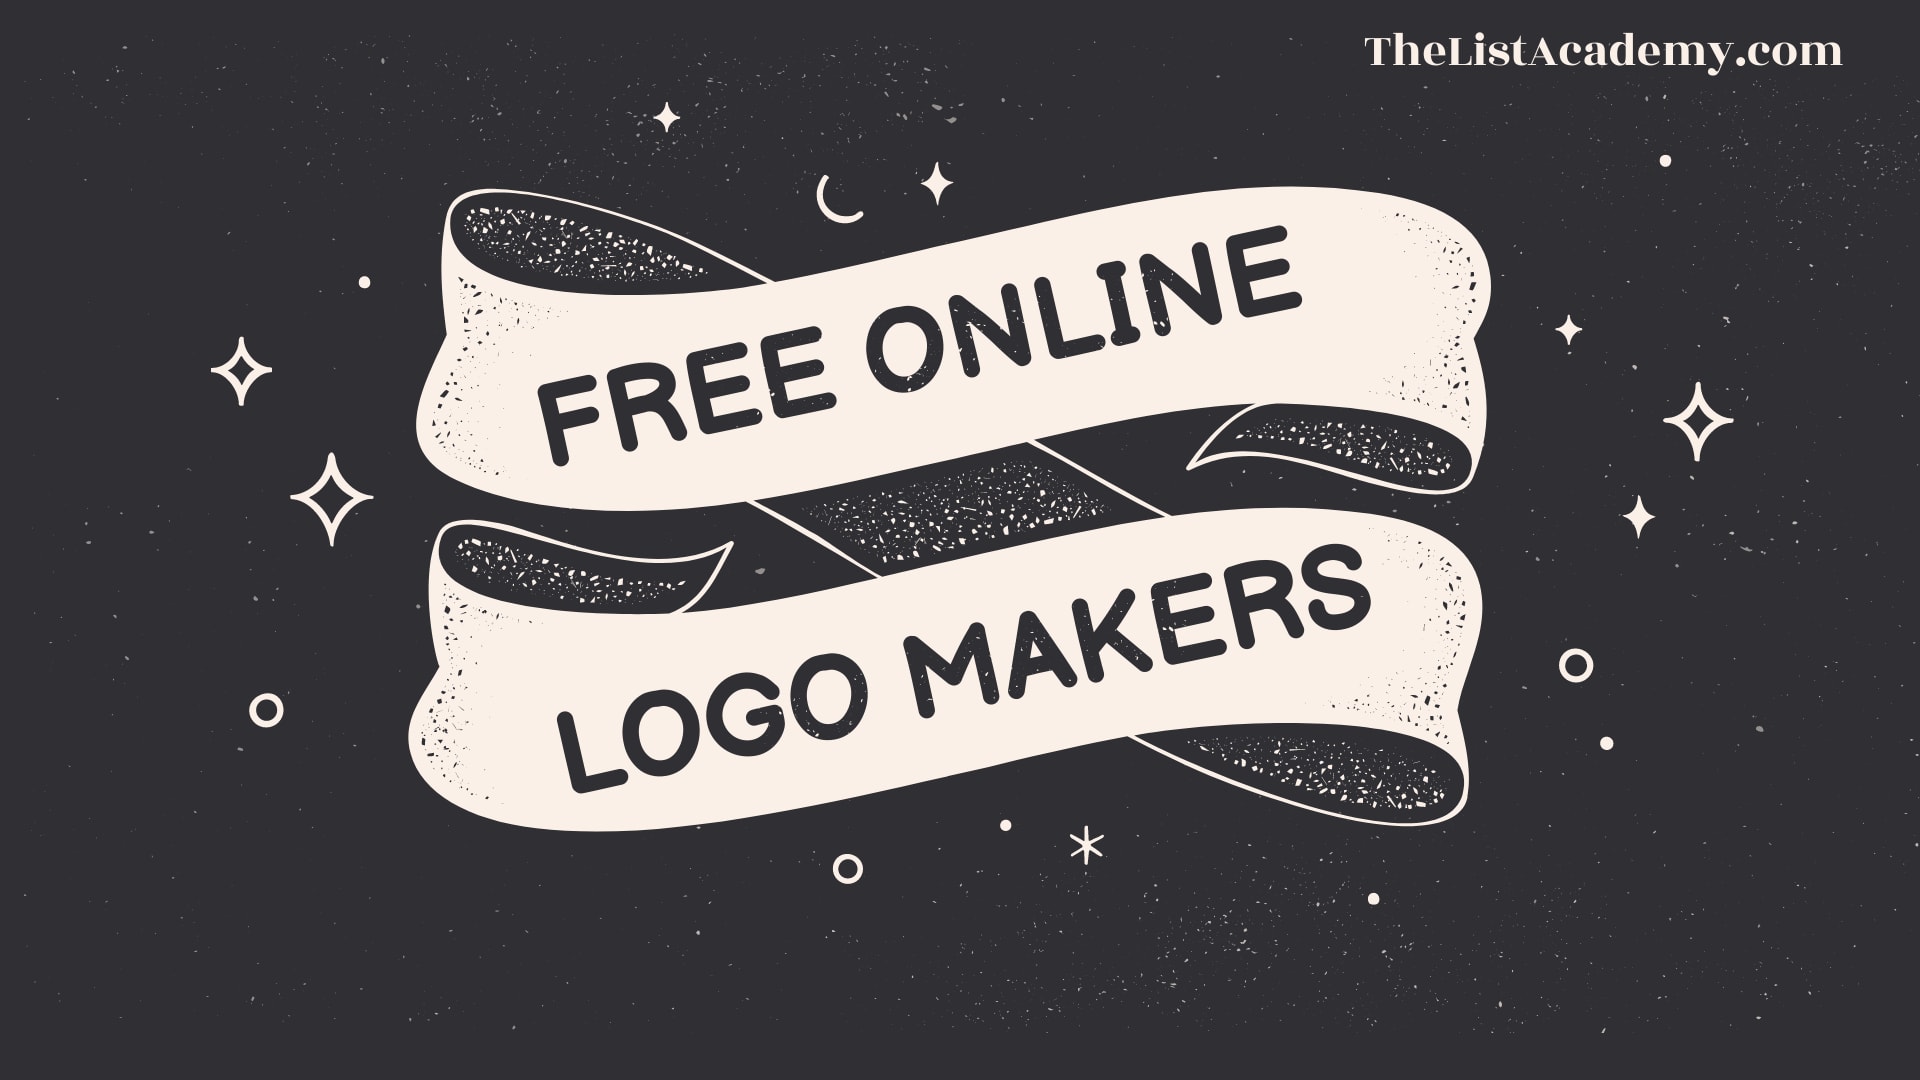 Cover Image For List : 100% Free Online Logo Makers |  11 Sites To Create Logos Without Paying Anything